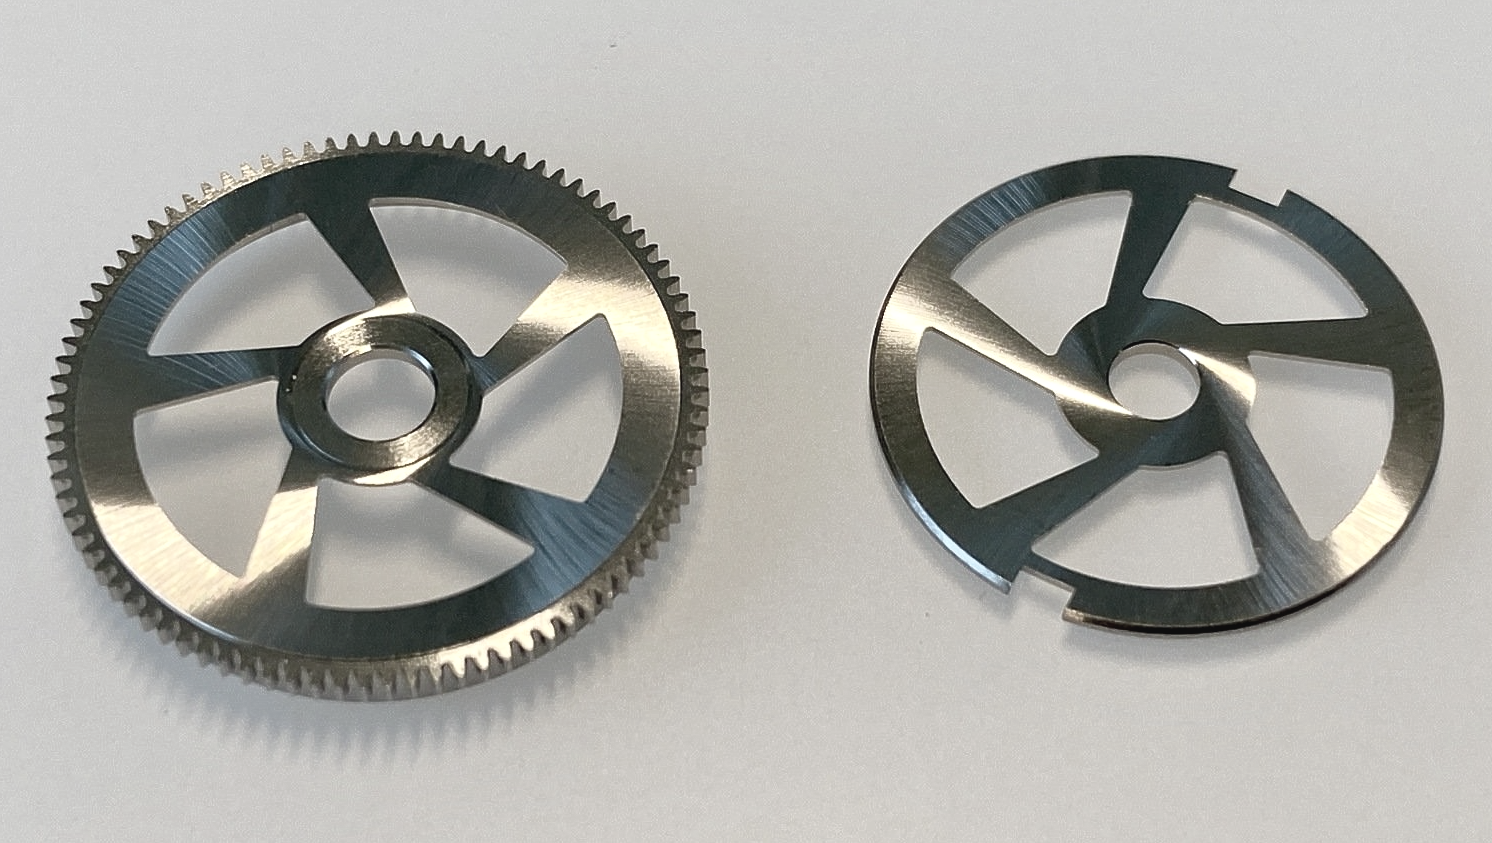 Two stainless steel gears on a white surface.